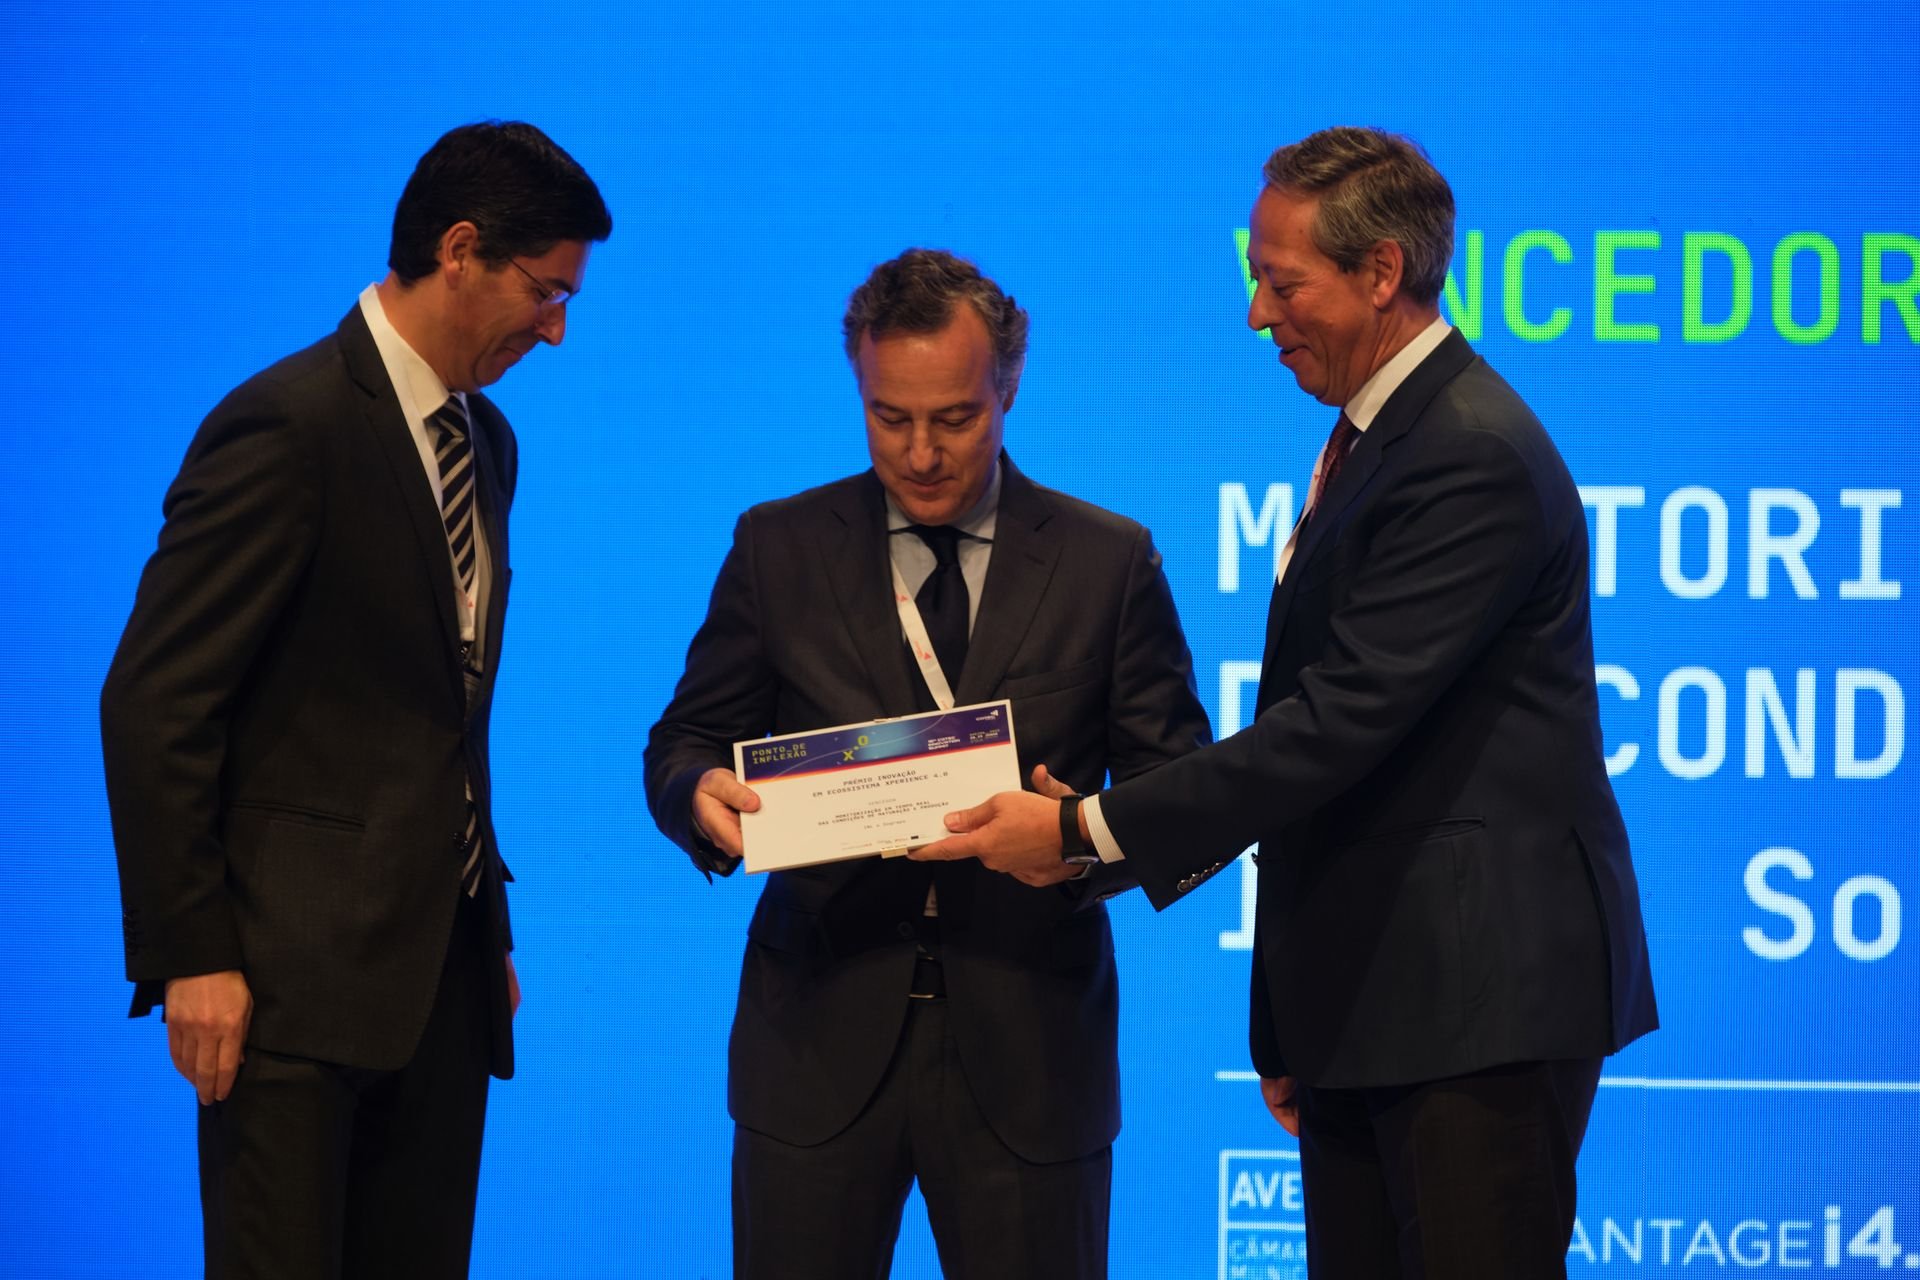 i-Grape project recognized with the “Innovation in XPERIENCE 4.0 Ecosystem” Award at COTEC Portugal Innovation Summit